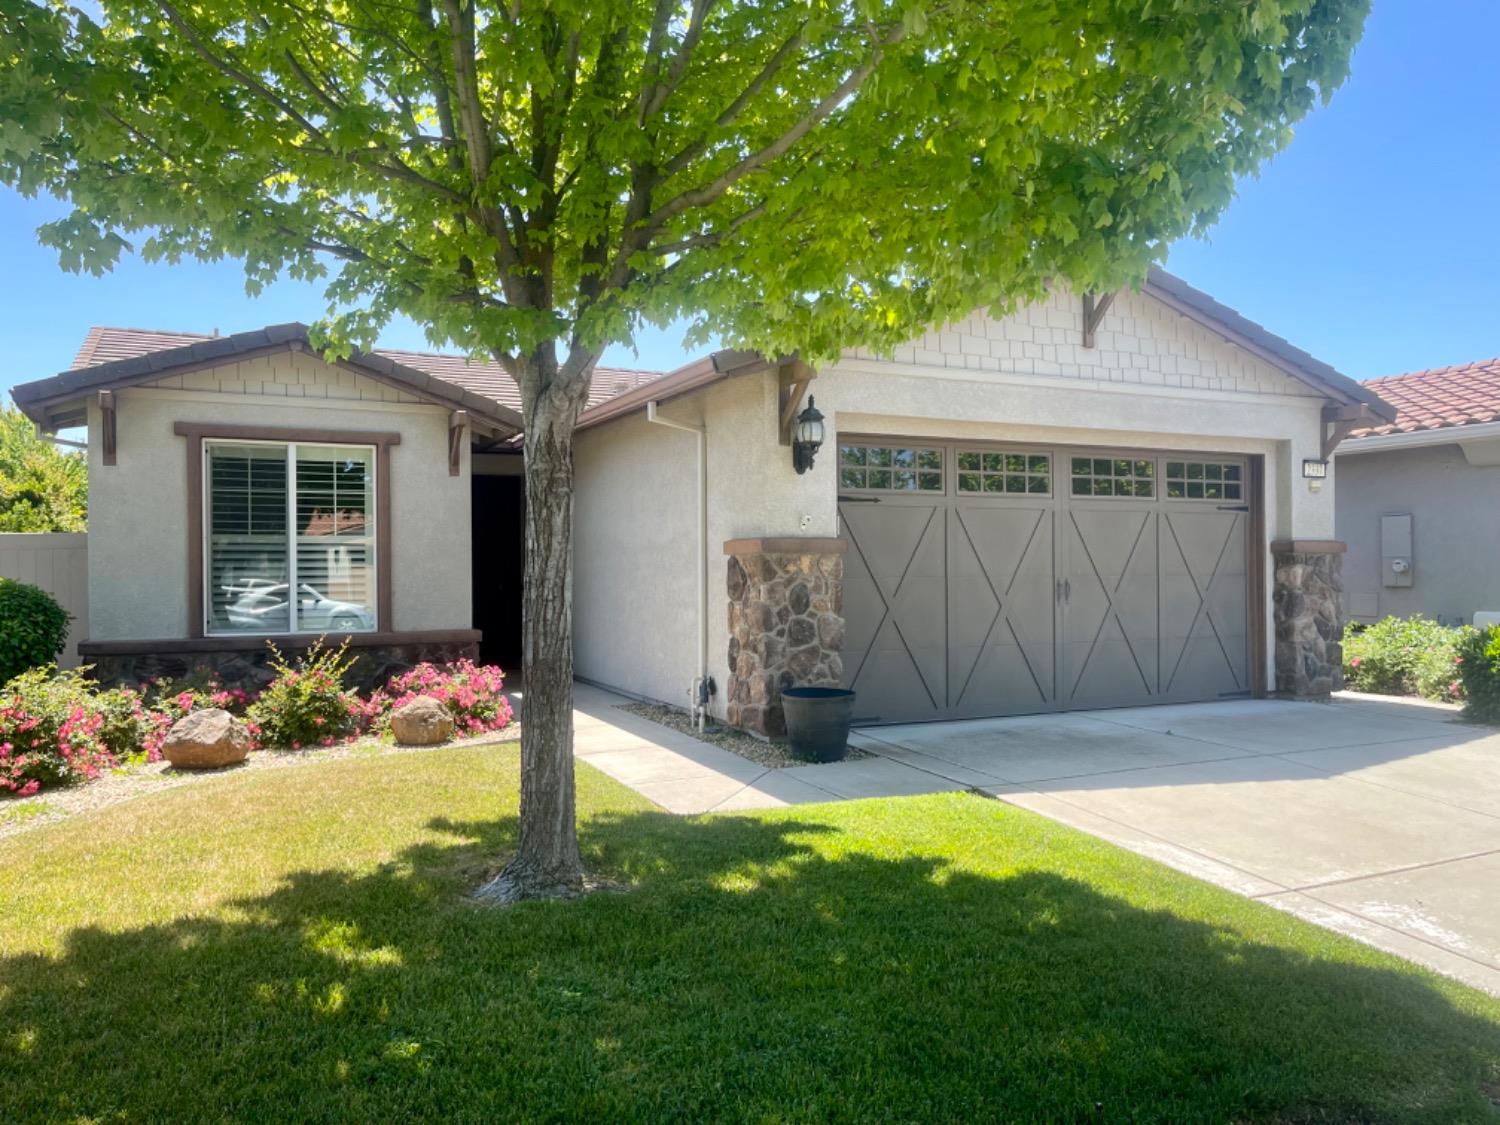 Photo of 2337 Shadow Berry Dr in Manteca, CA